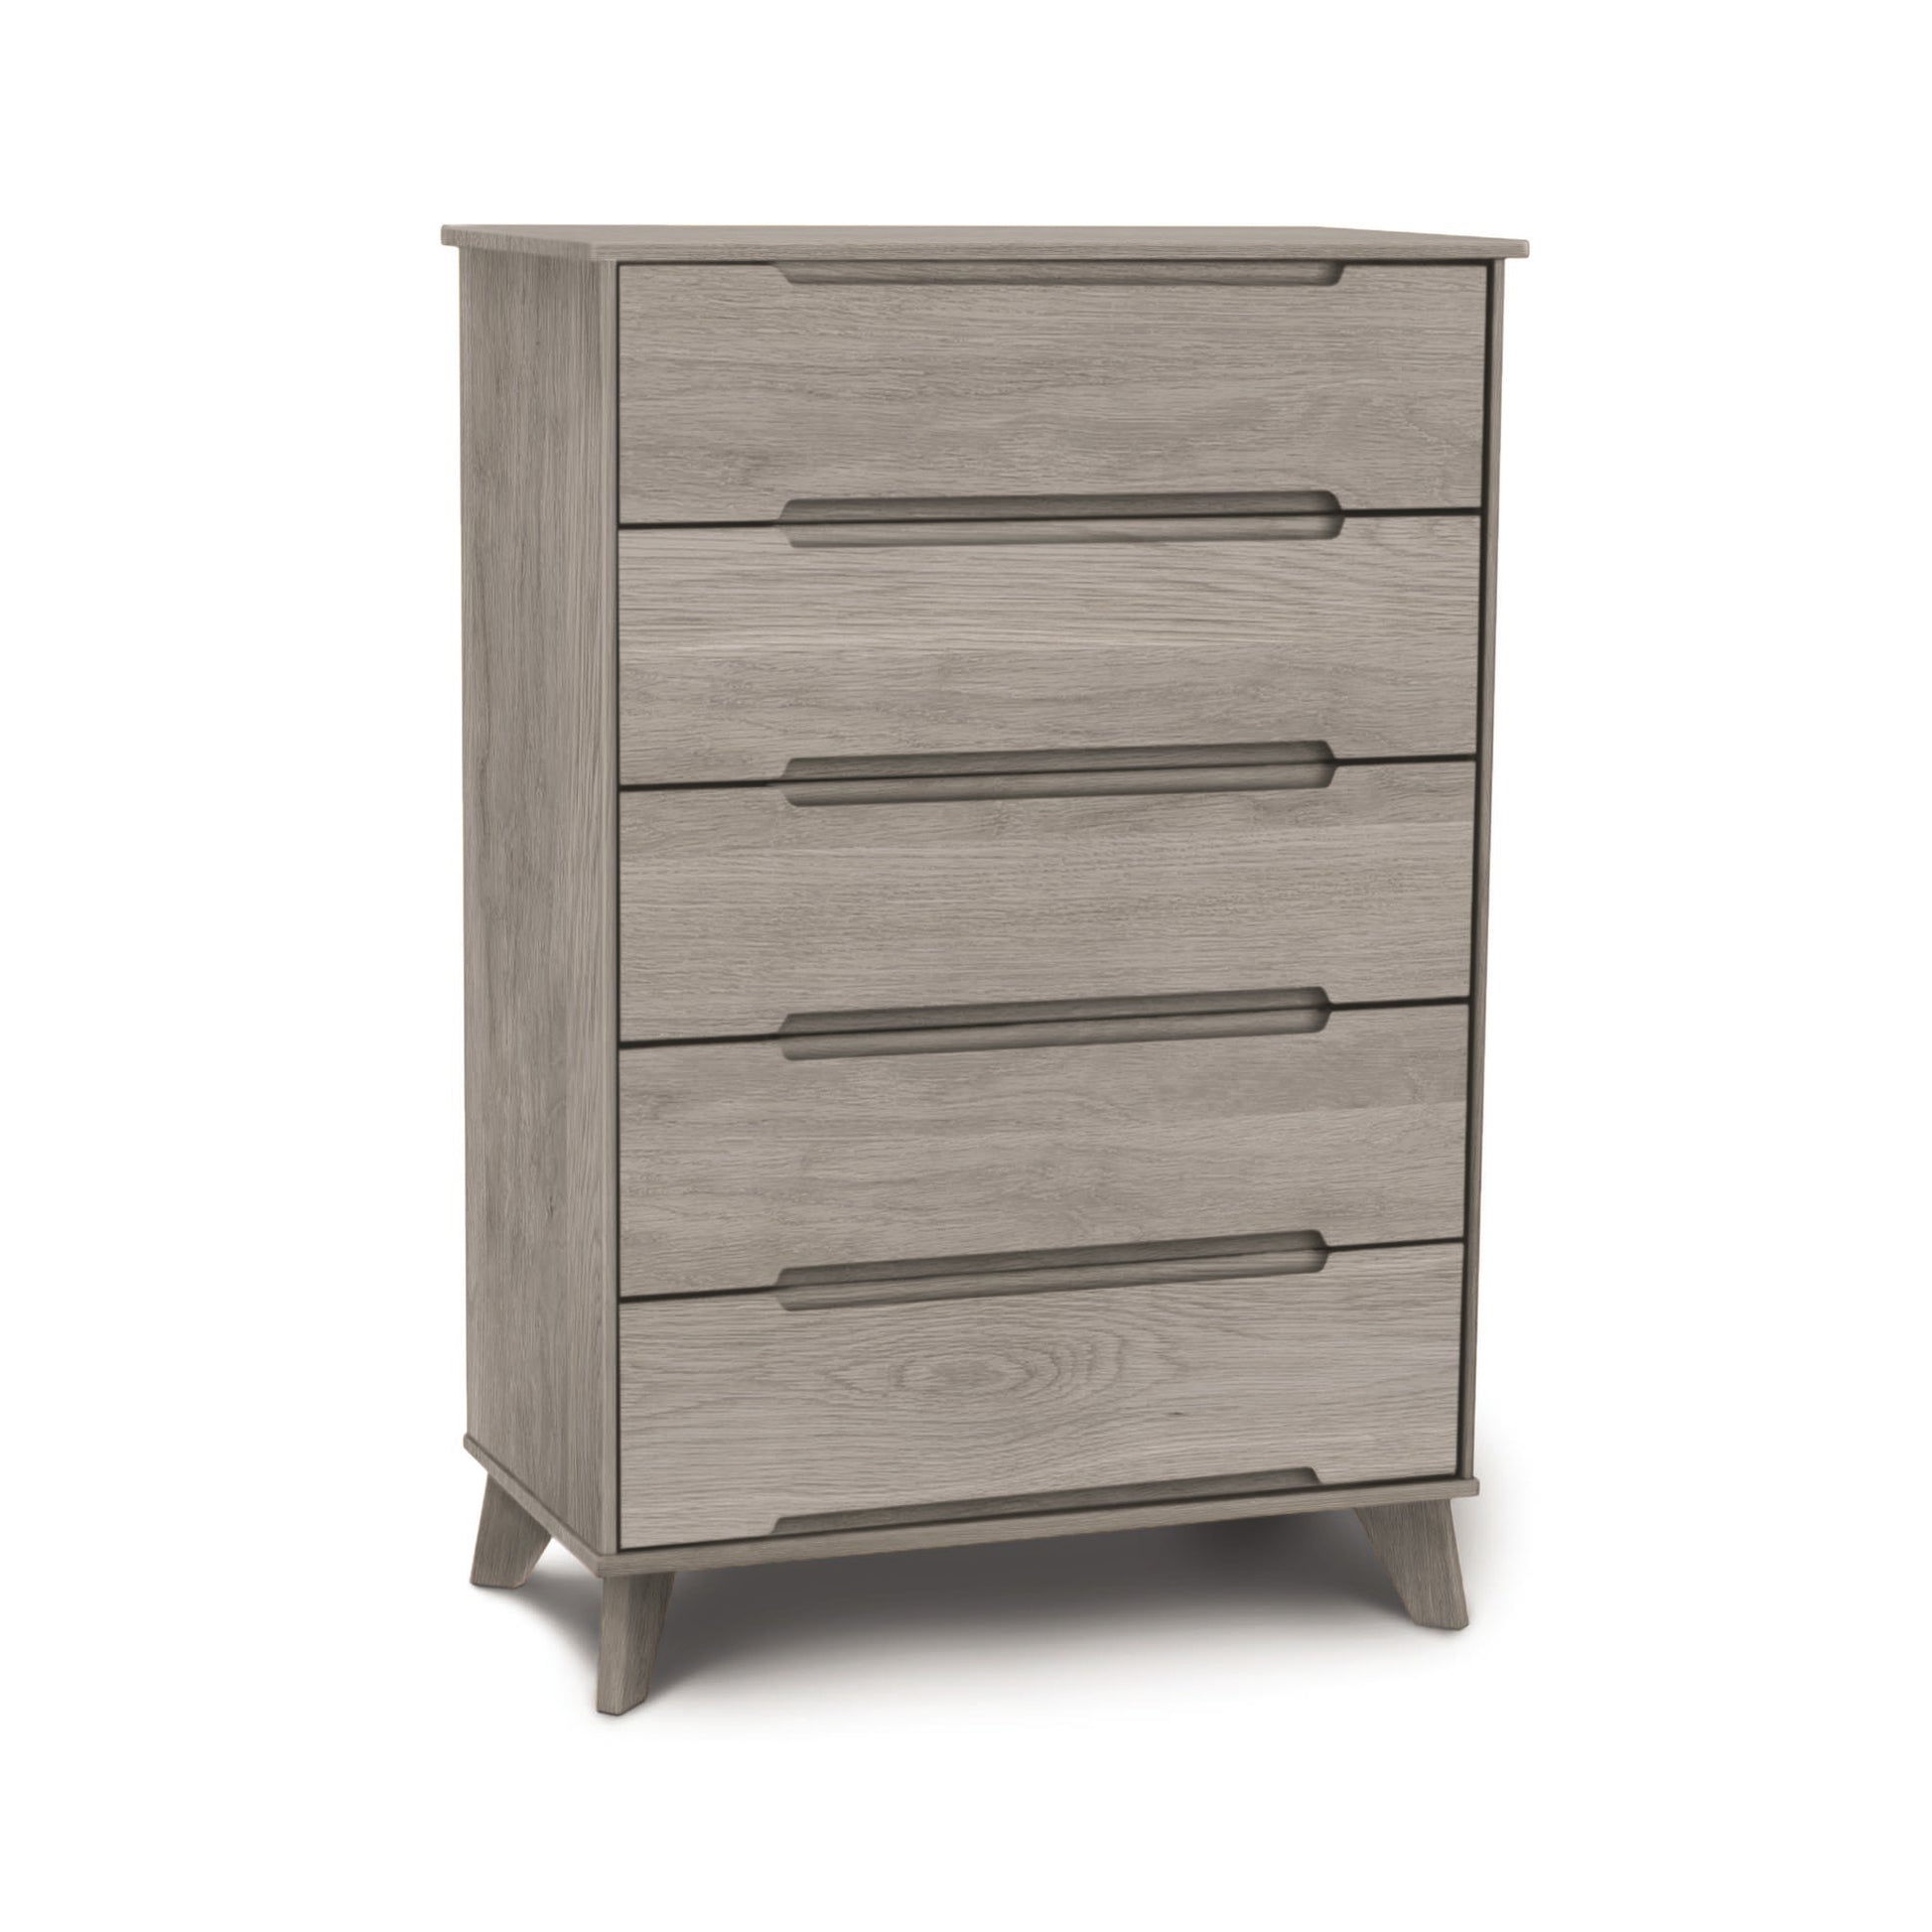 A modern five-drawer wooden dresser with a mid-century modern design and a light gray finish, standing isolated on a white background, by Copeland Furniture.